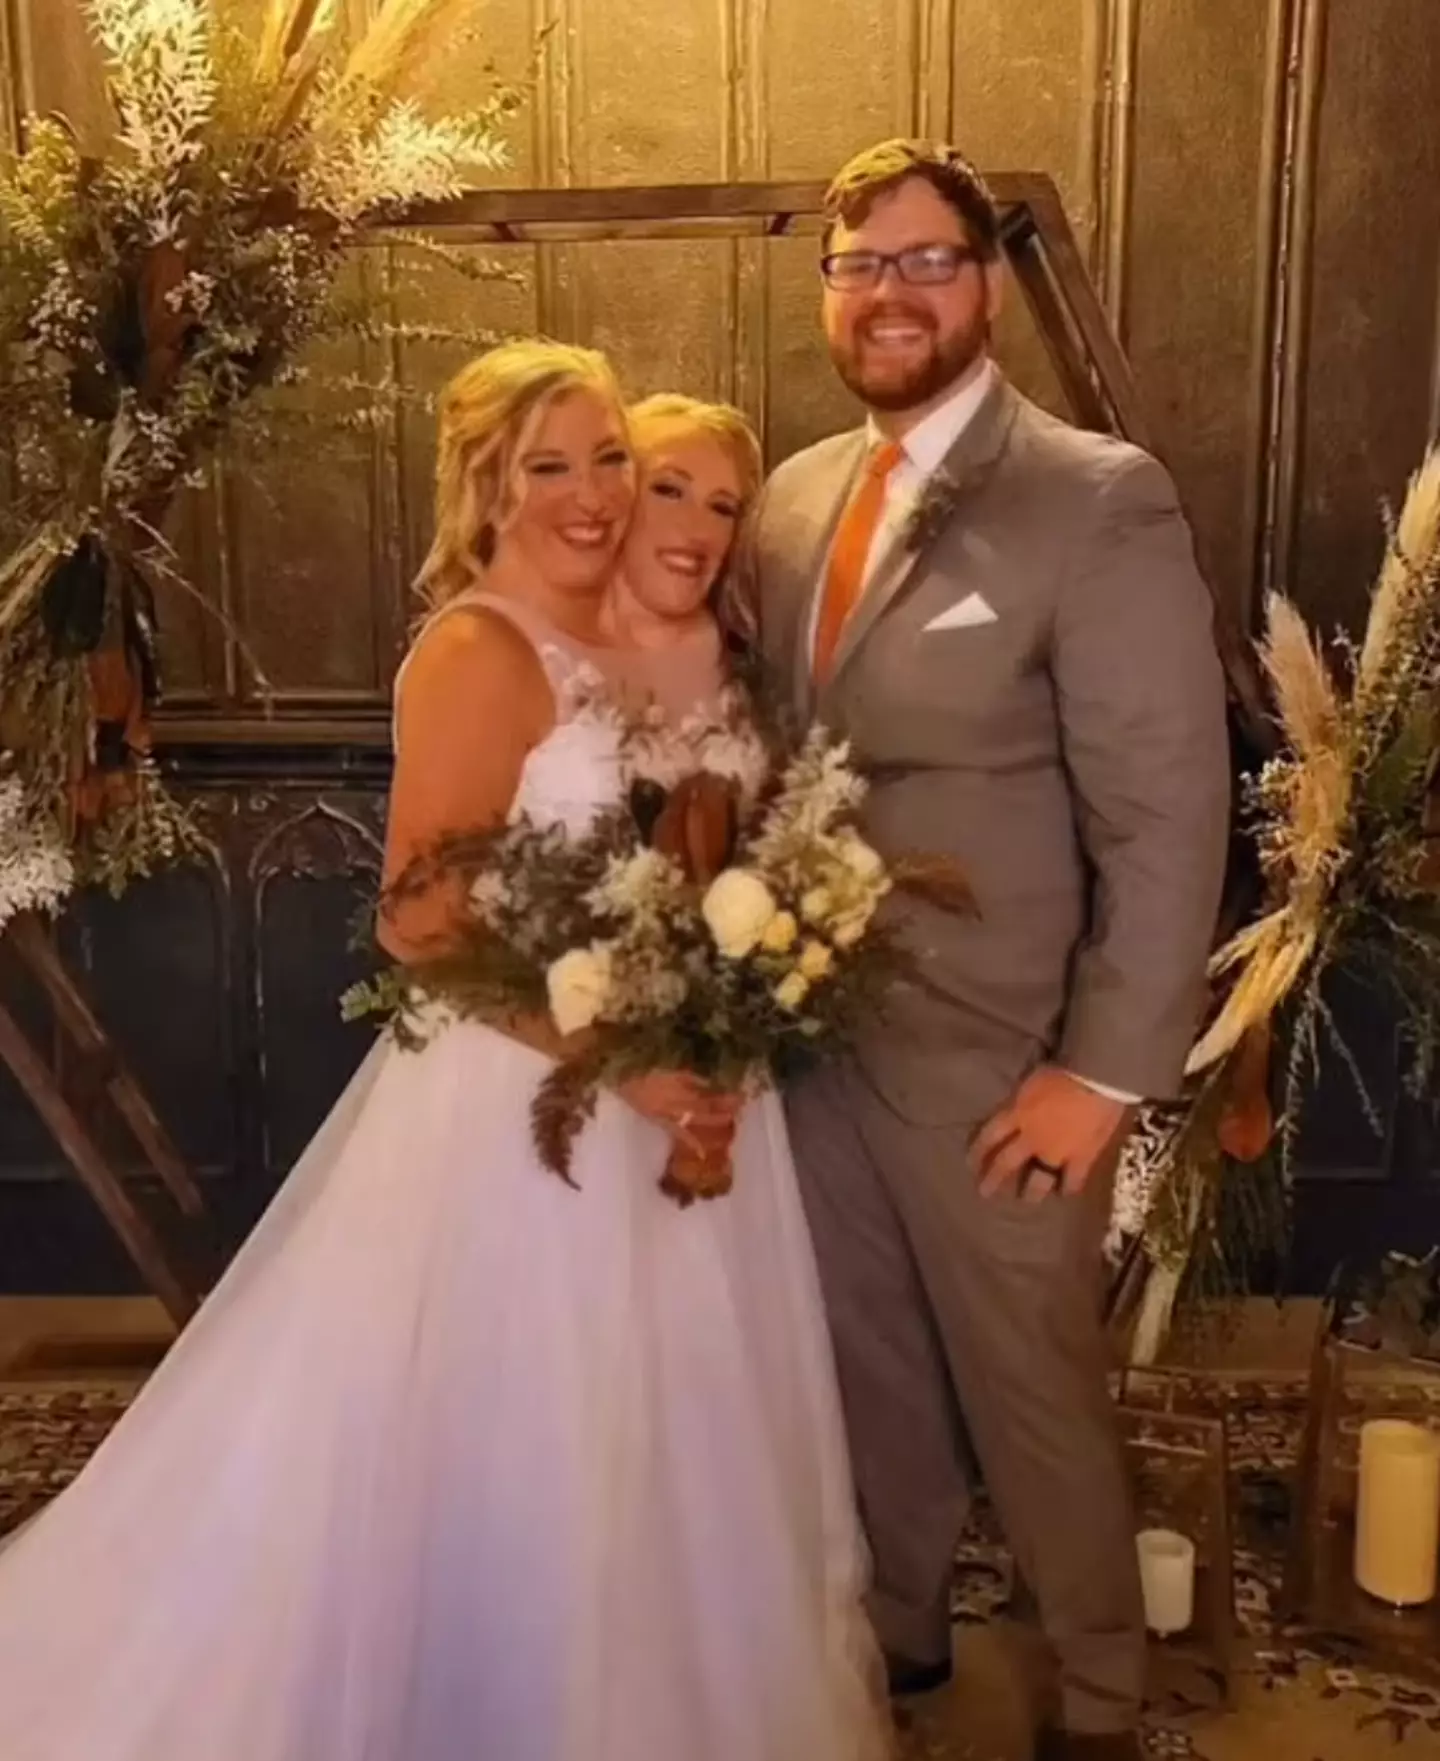 The video shared more snaps from the big day. (TikTok/Abbyandbrittanyhensel)